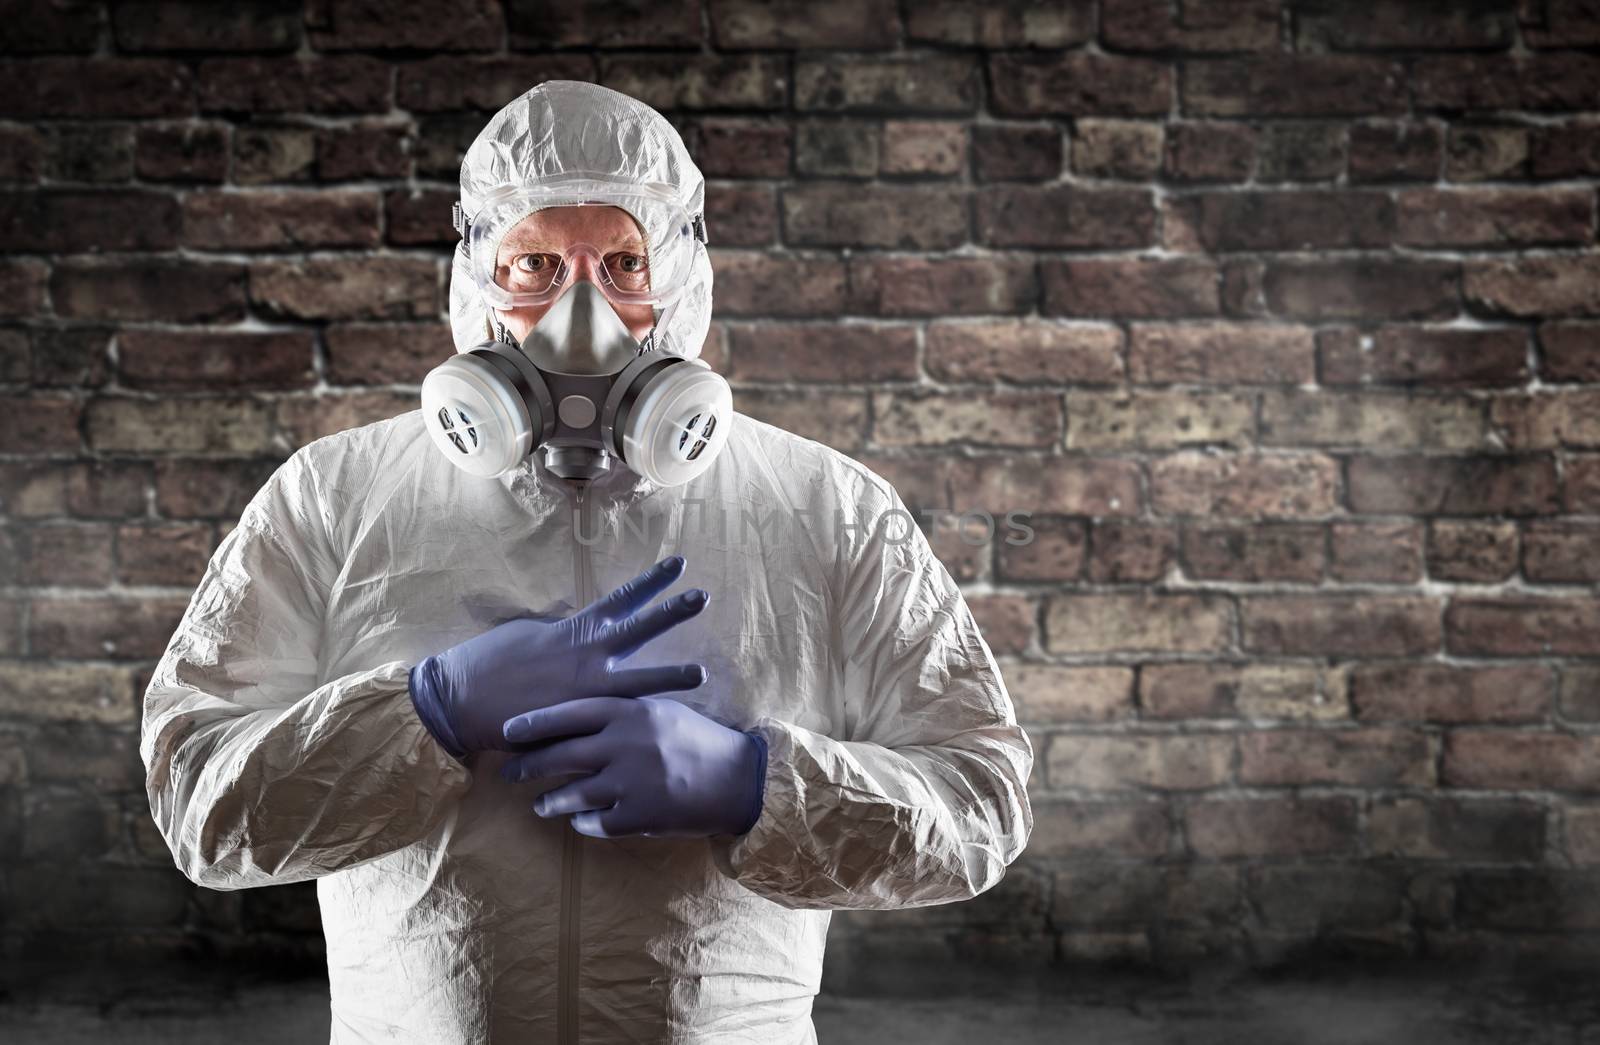 Man Wearing Hazmat Suit, Protective Gas Mask and Goggles Against Brick Wall.